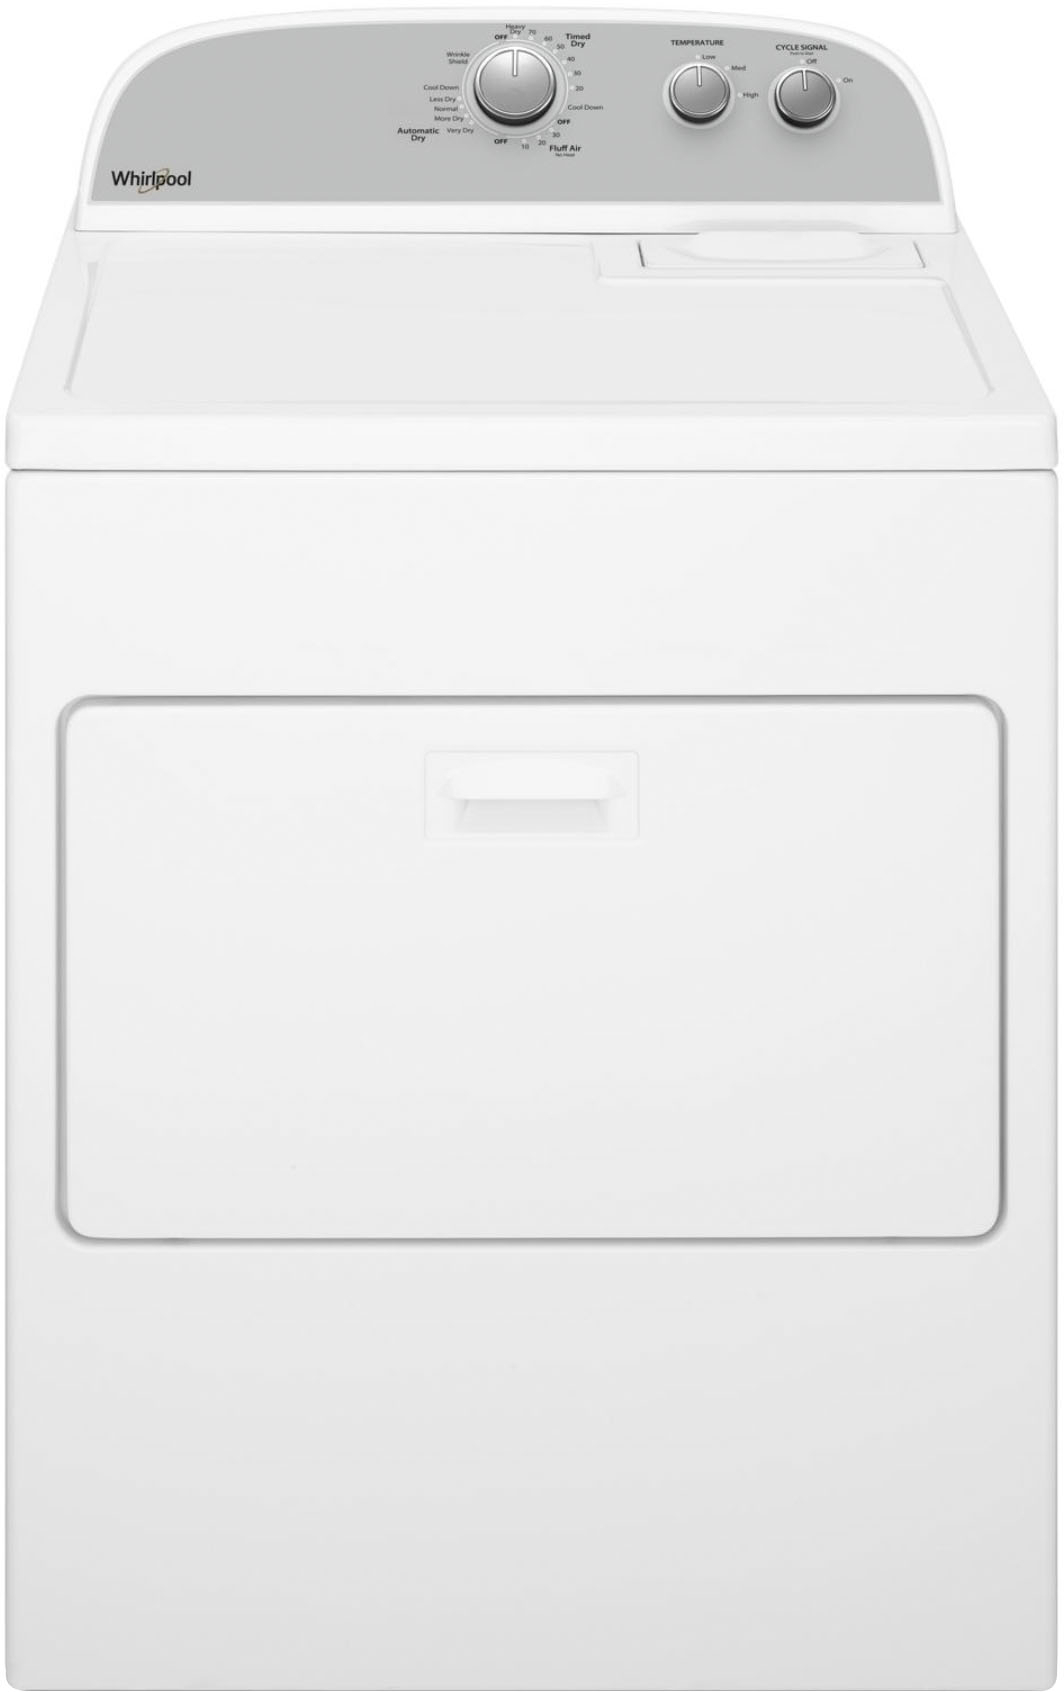 whirlpool-7-cu-ft-14-cycle-electric-dryer-white-at-pacific-sales